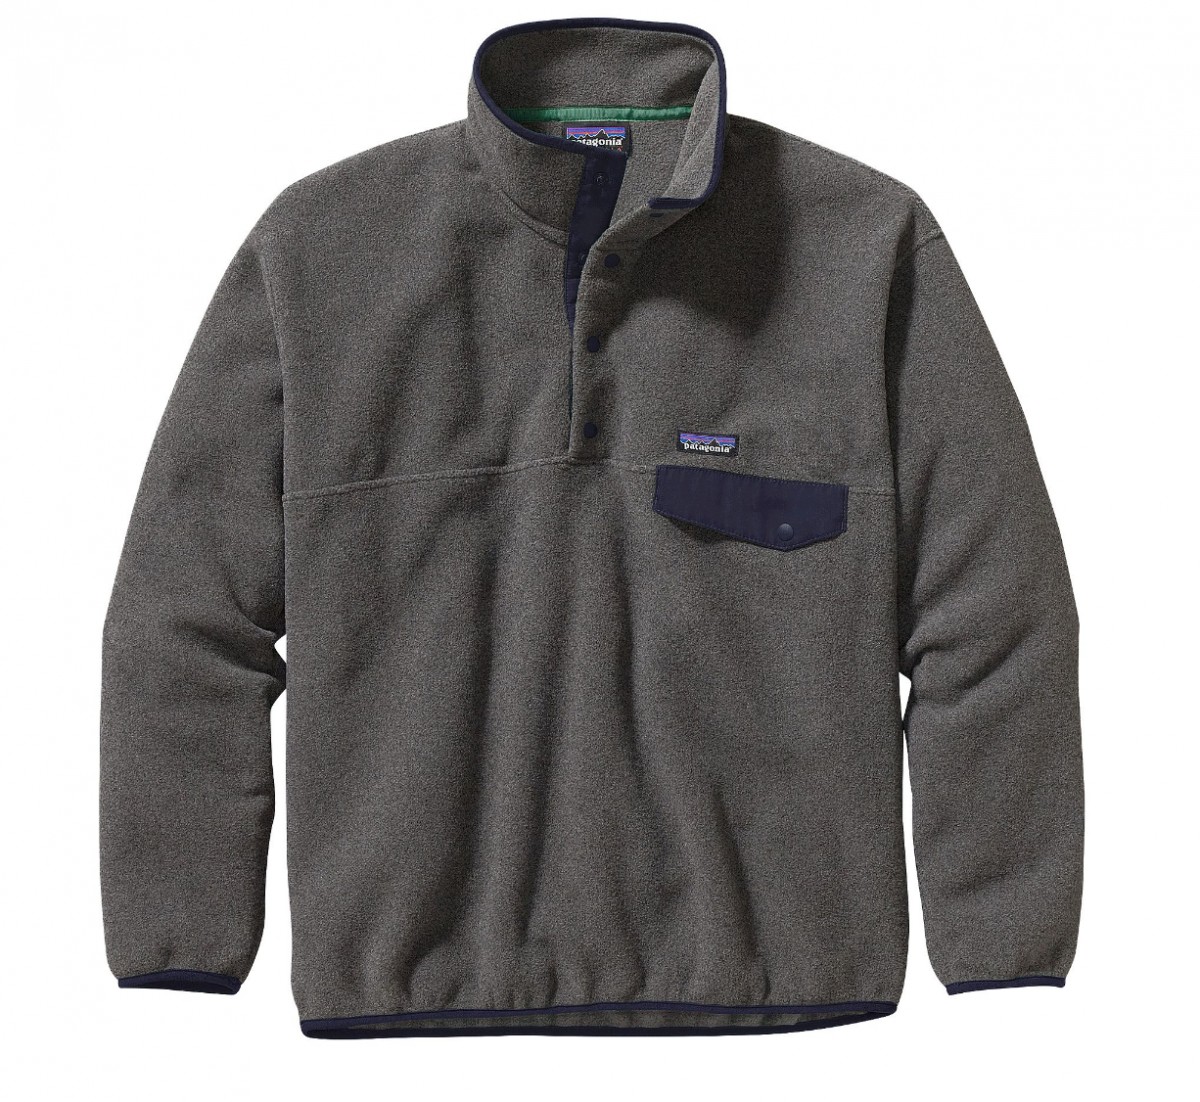 Patagonia Synchilla Snap-T Pullover Review (Patagonia Synchilla Snap-T Fleece Pullover)